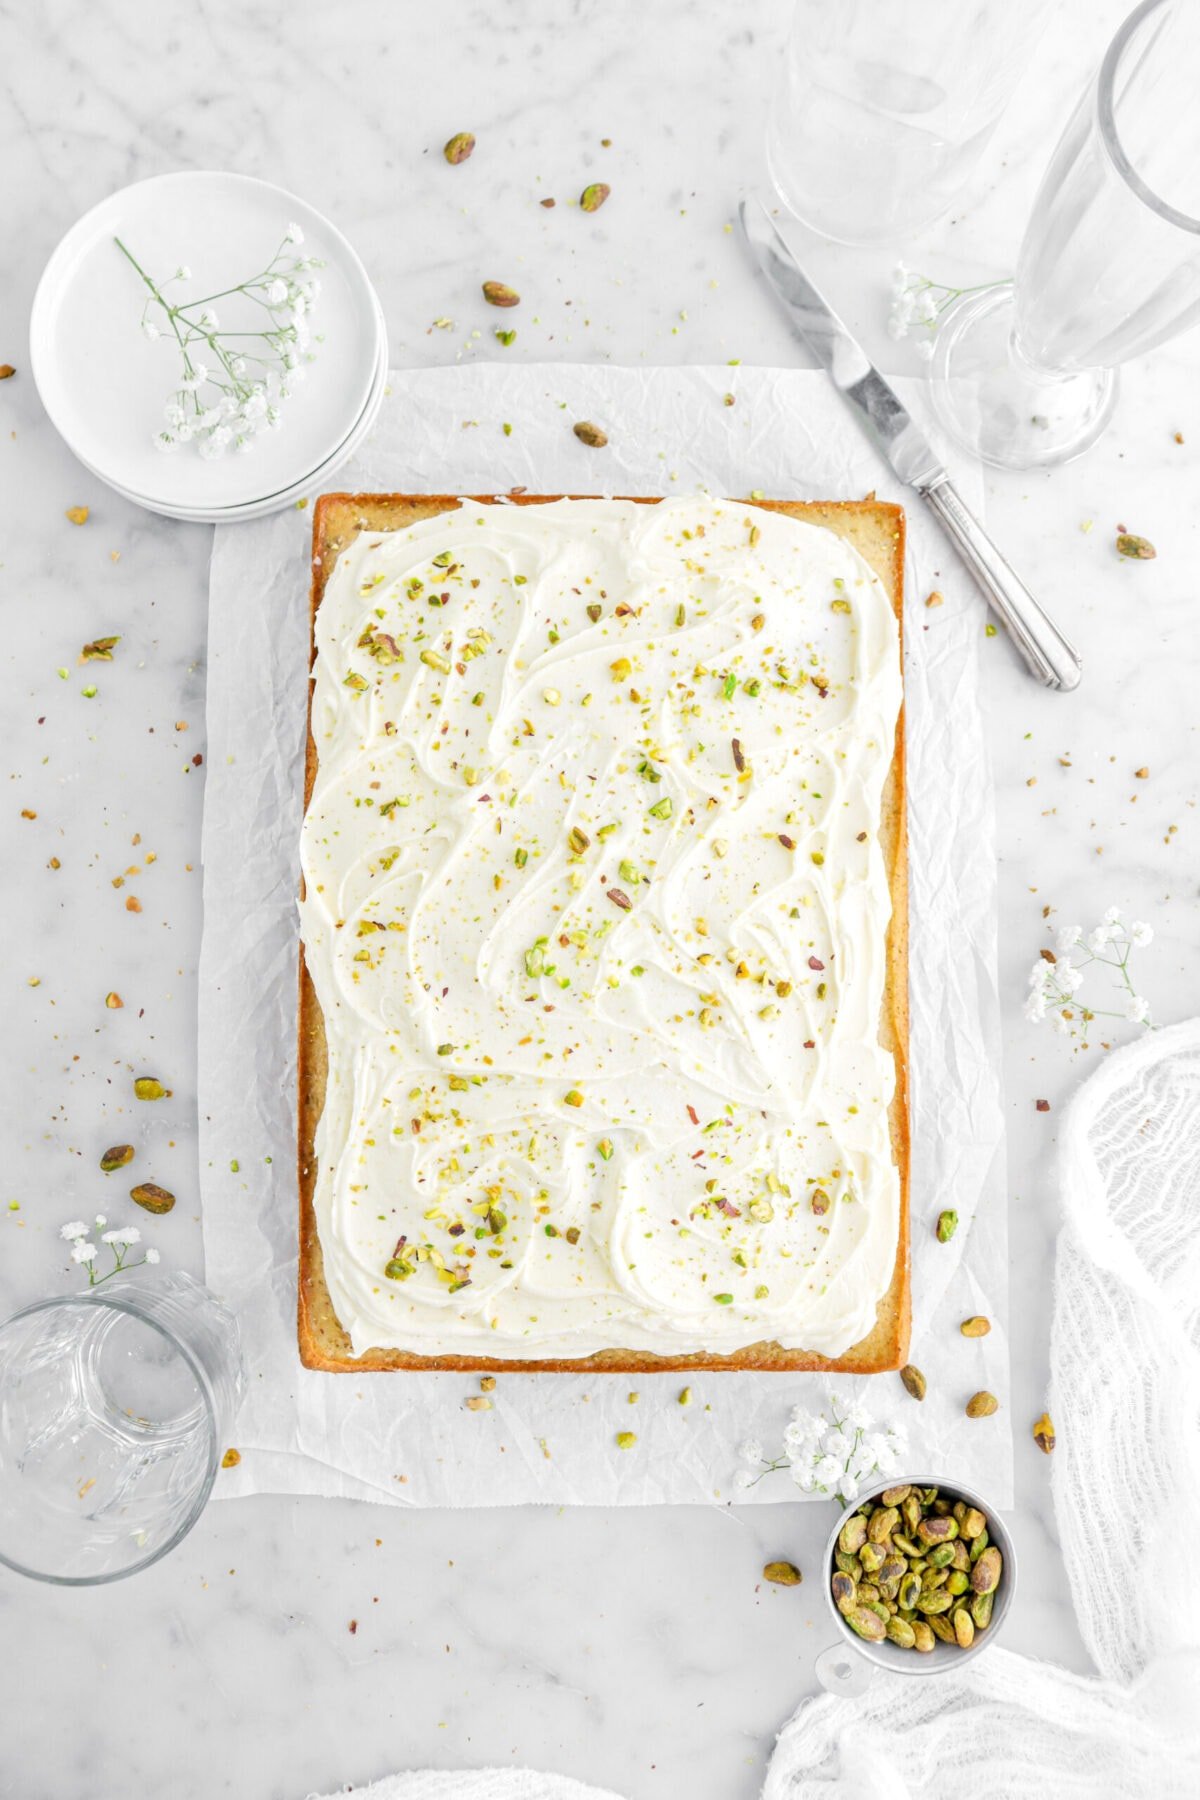 pistachio sheet cake on parchment paper with buttercream frosting and pistachios around with white flowers.